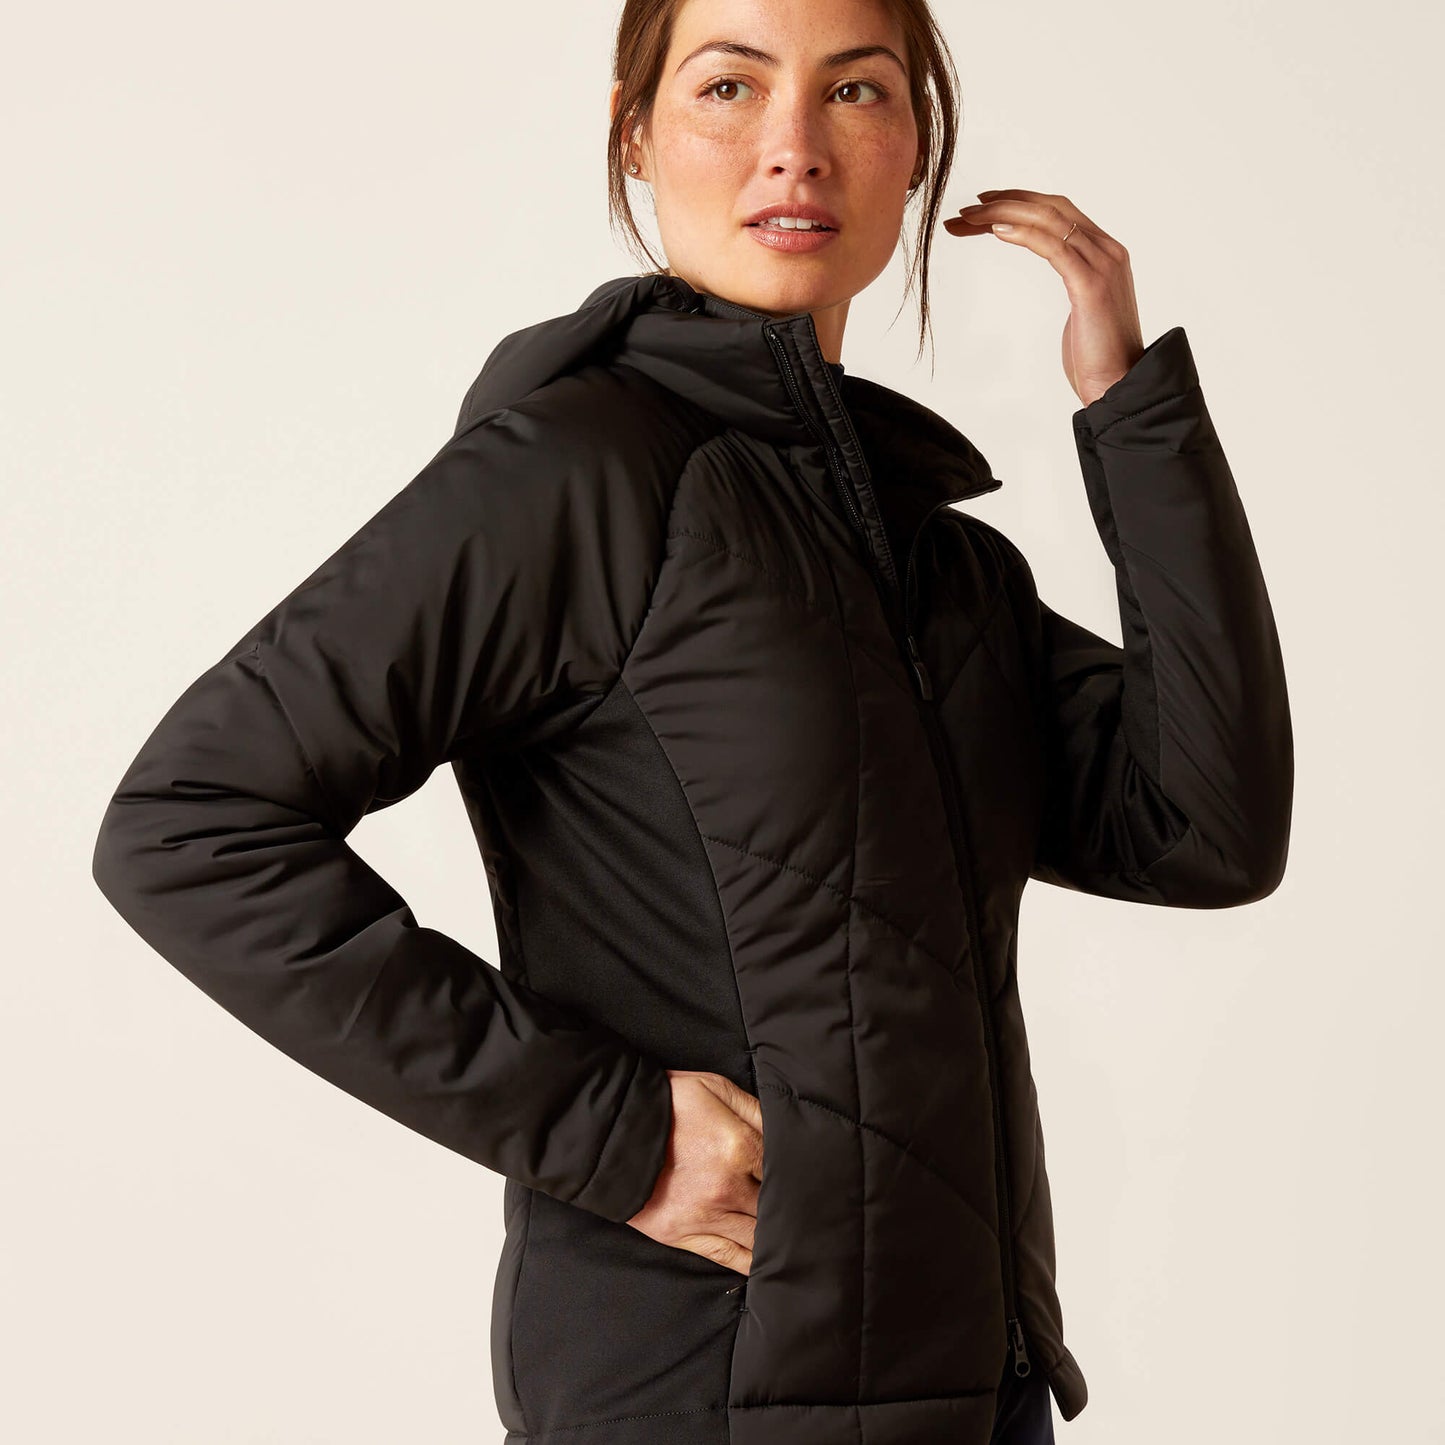 Ariat Black Zonal Insulated Jacket